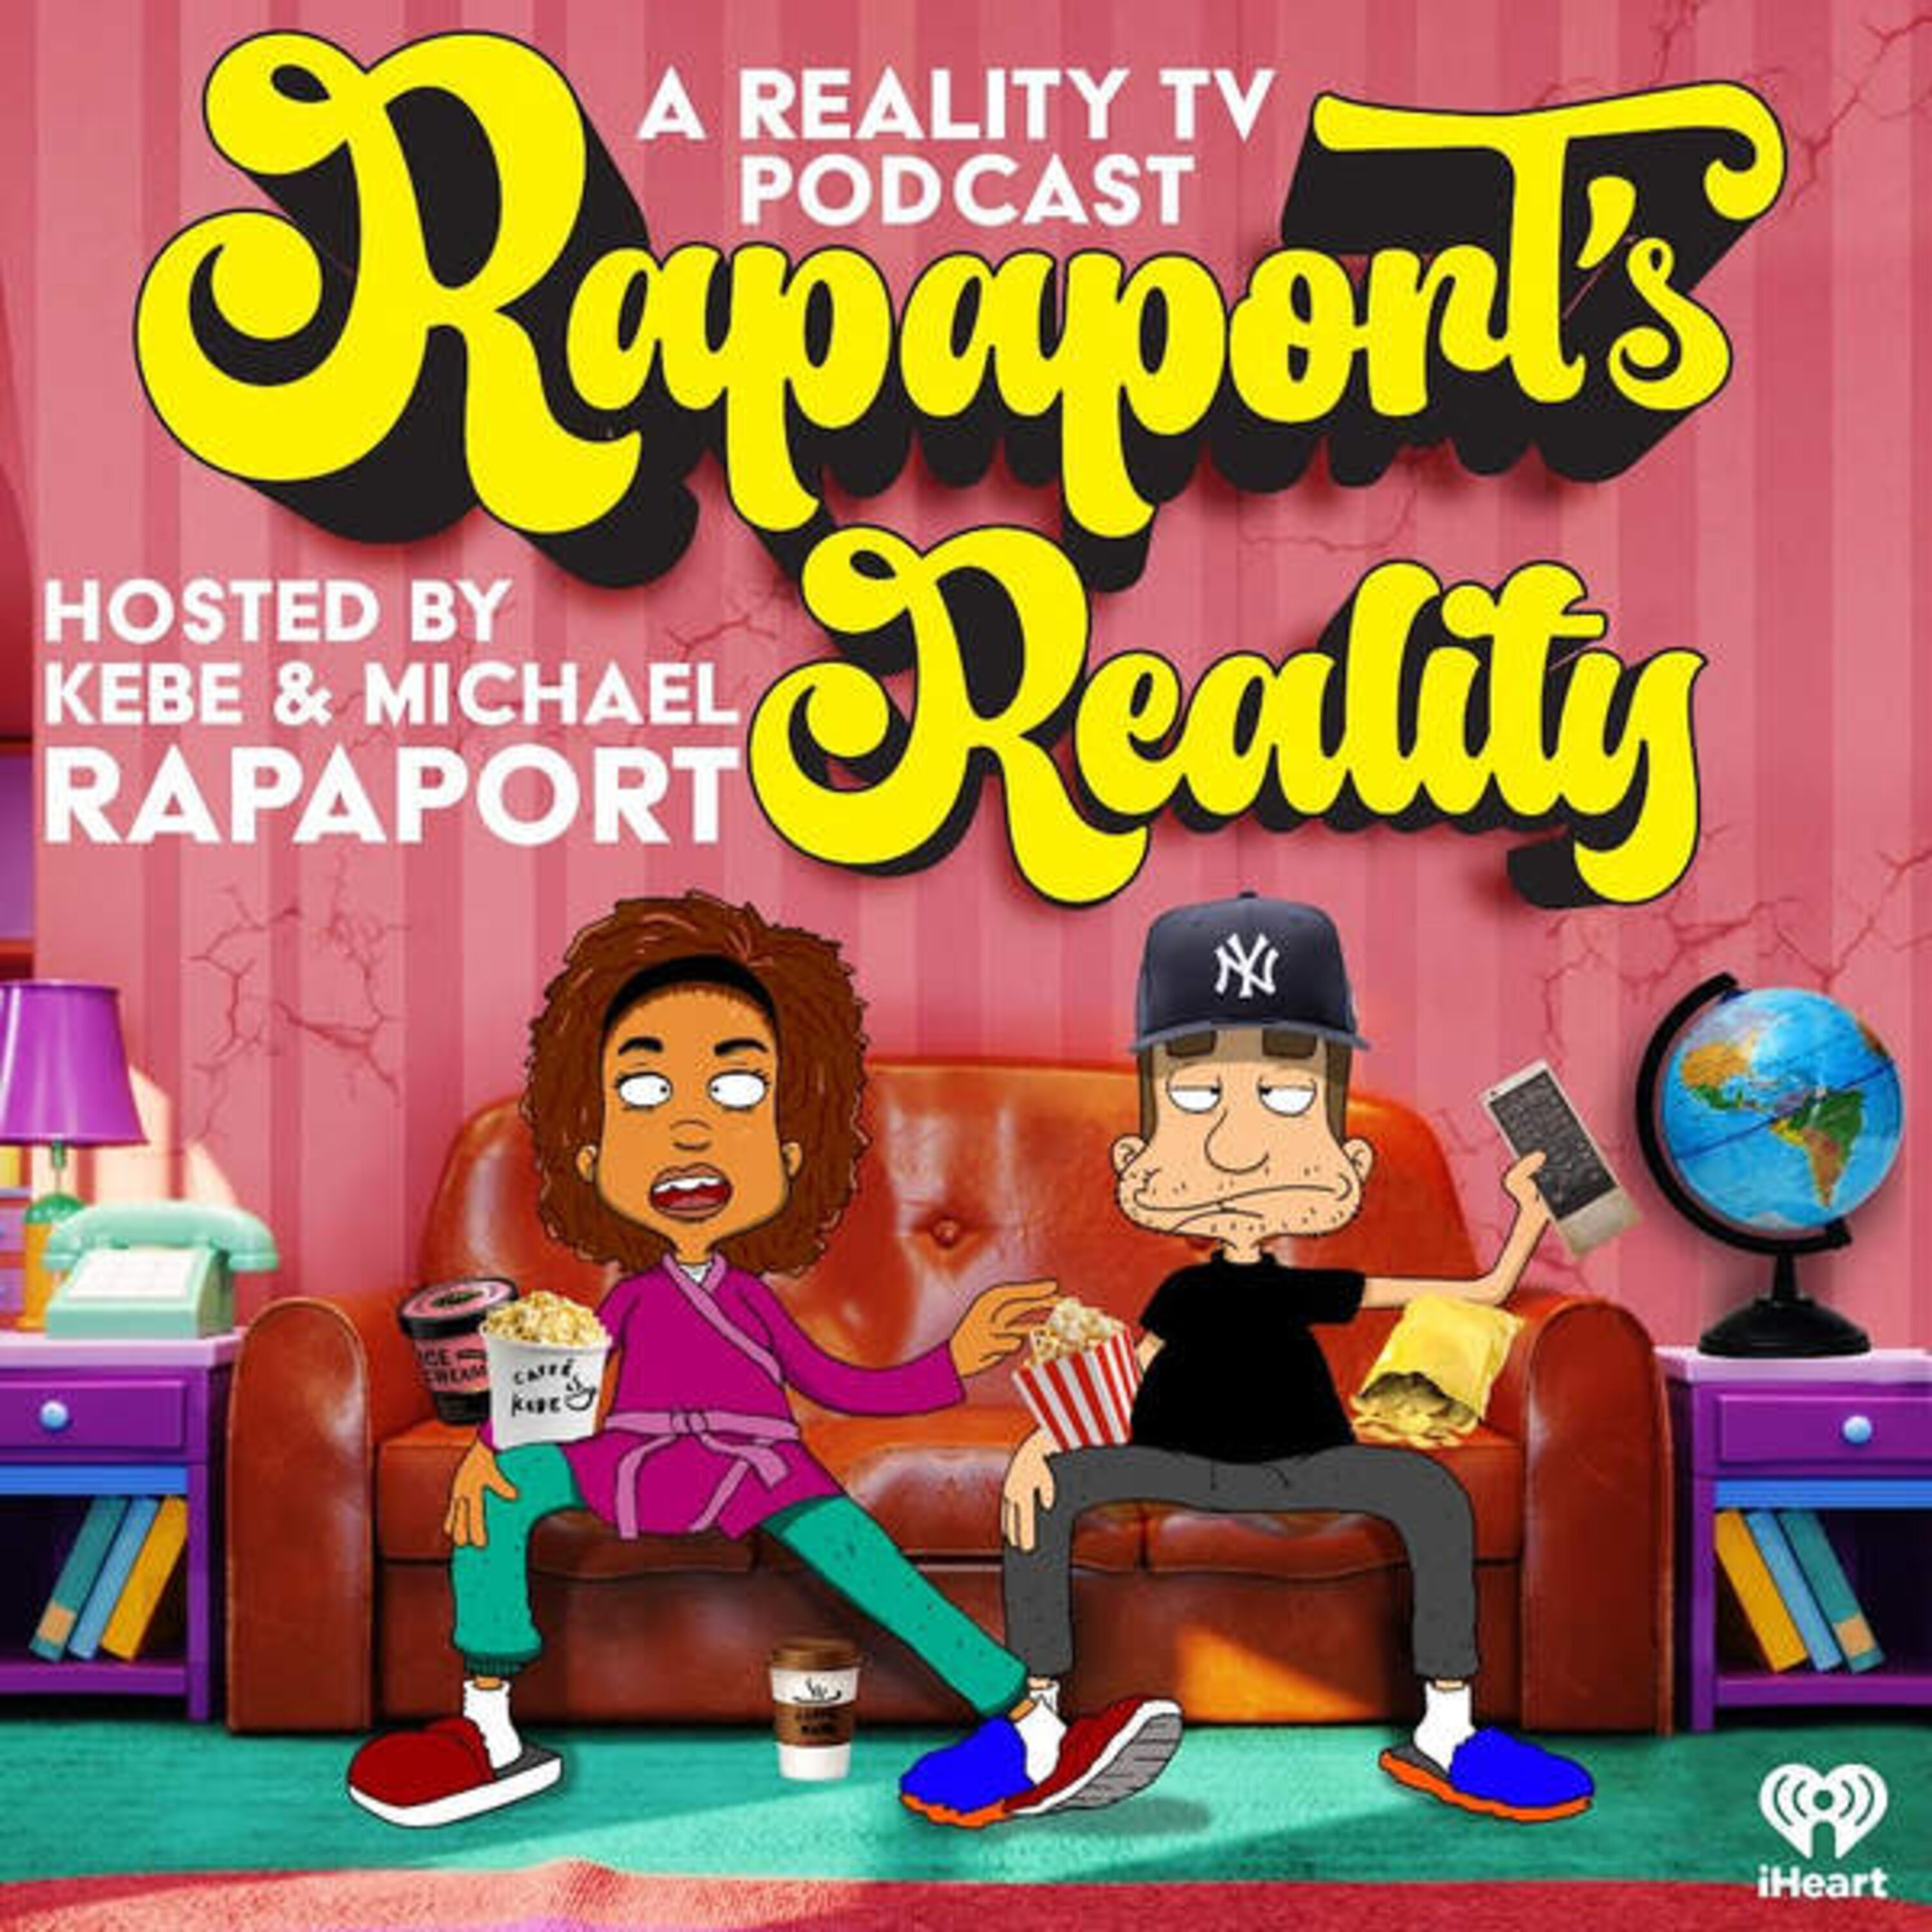 RAPAPORT'S REALITY EP 5 - RHOP & DADDY G LOVE HAS SOMETHING TO SAY/VANDERPUMP RULES SEXCAPADES & DOG DRAMA/3 OR 4 EPISODE IN ANALYSIS OF THE VALLEY